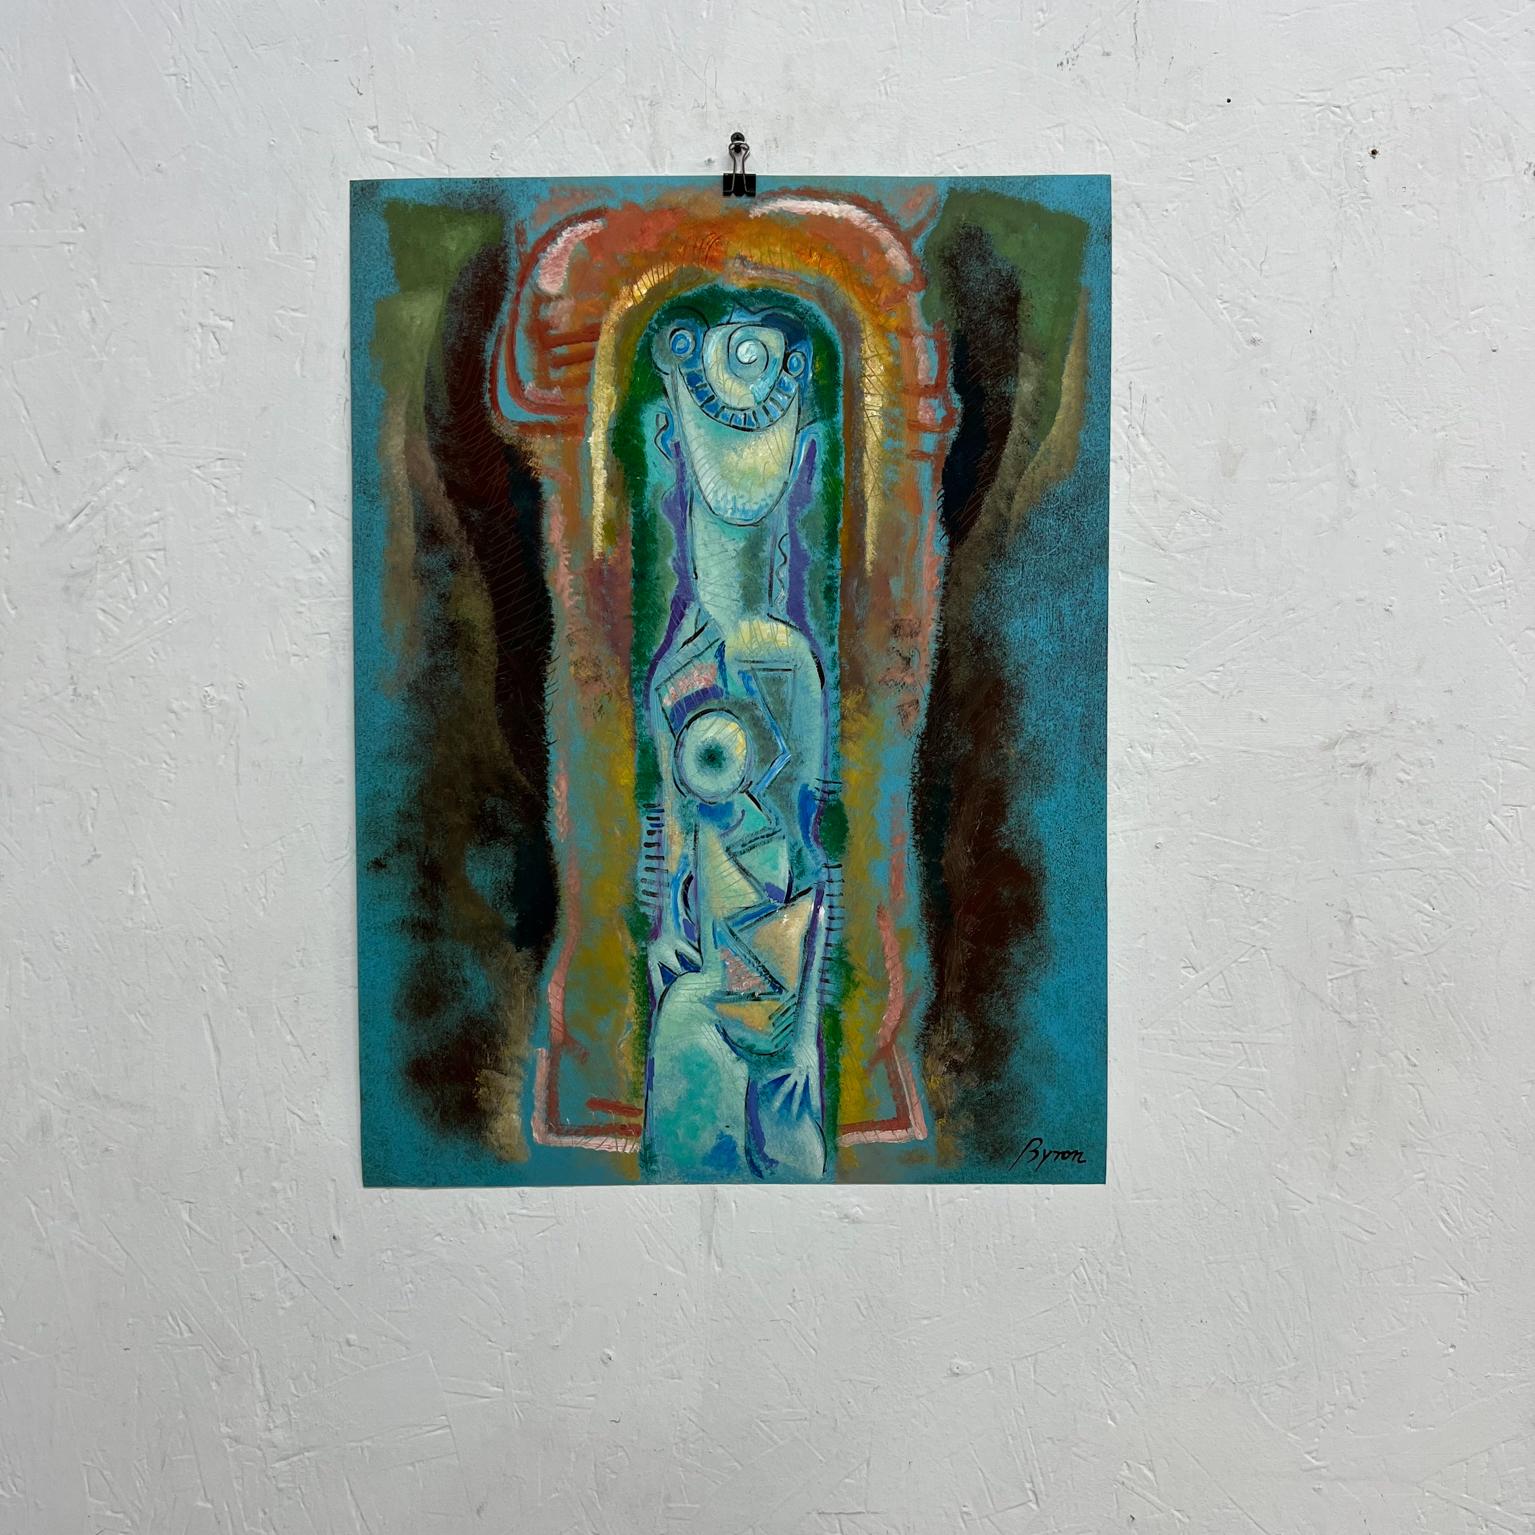 1980s Byron Gálvez Abstract Modernism Dreamy Blue Artwork Mexico
17.75 x 23.75
Signed Art
Preowned condition original vintage art 
See all images provided.
 